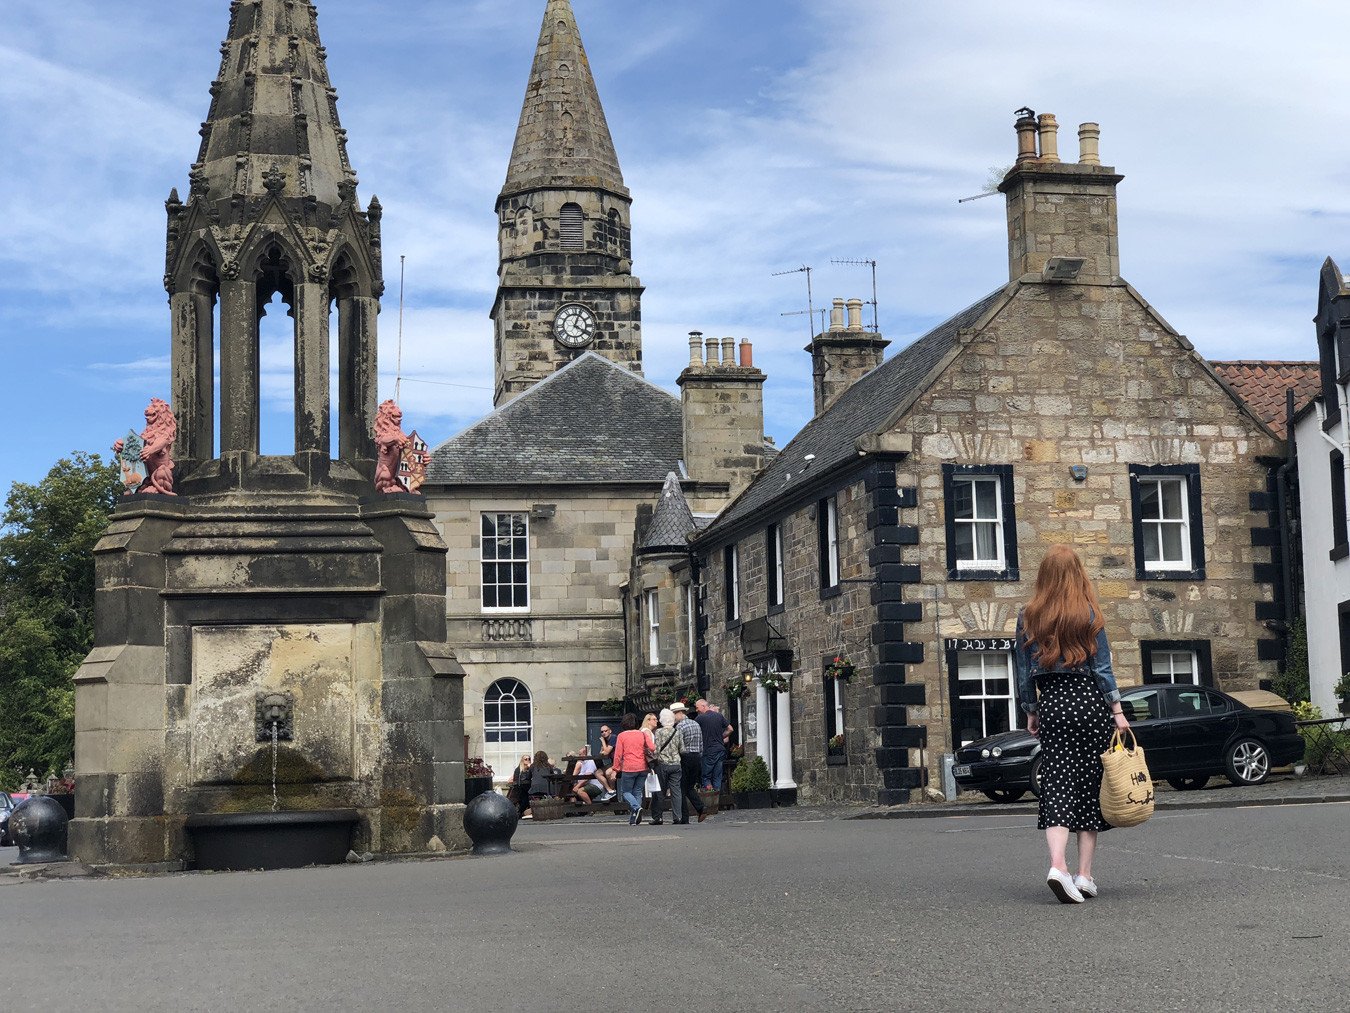 The Covenanter hotel, Falkland - an Outlander filming location